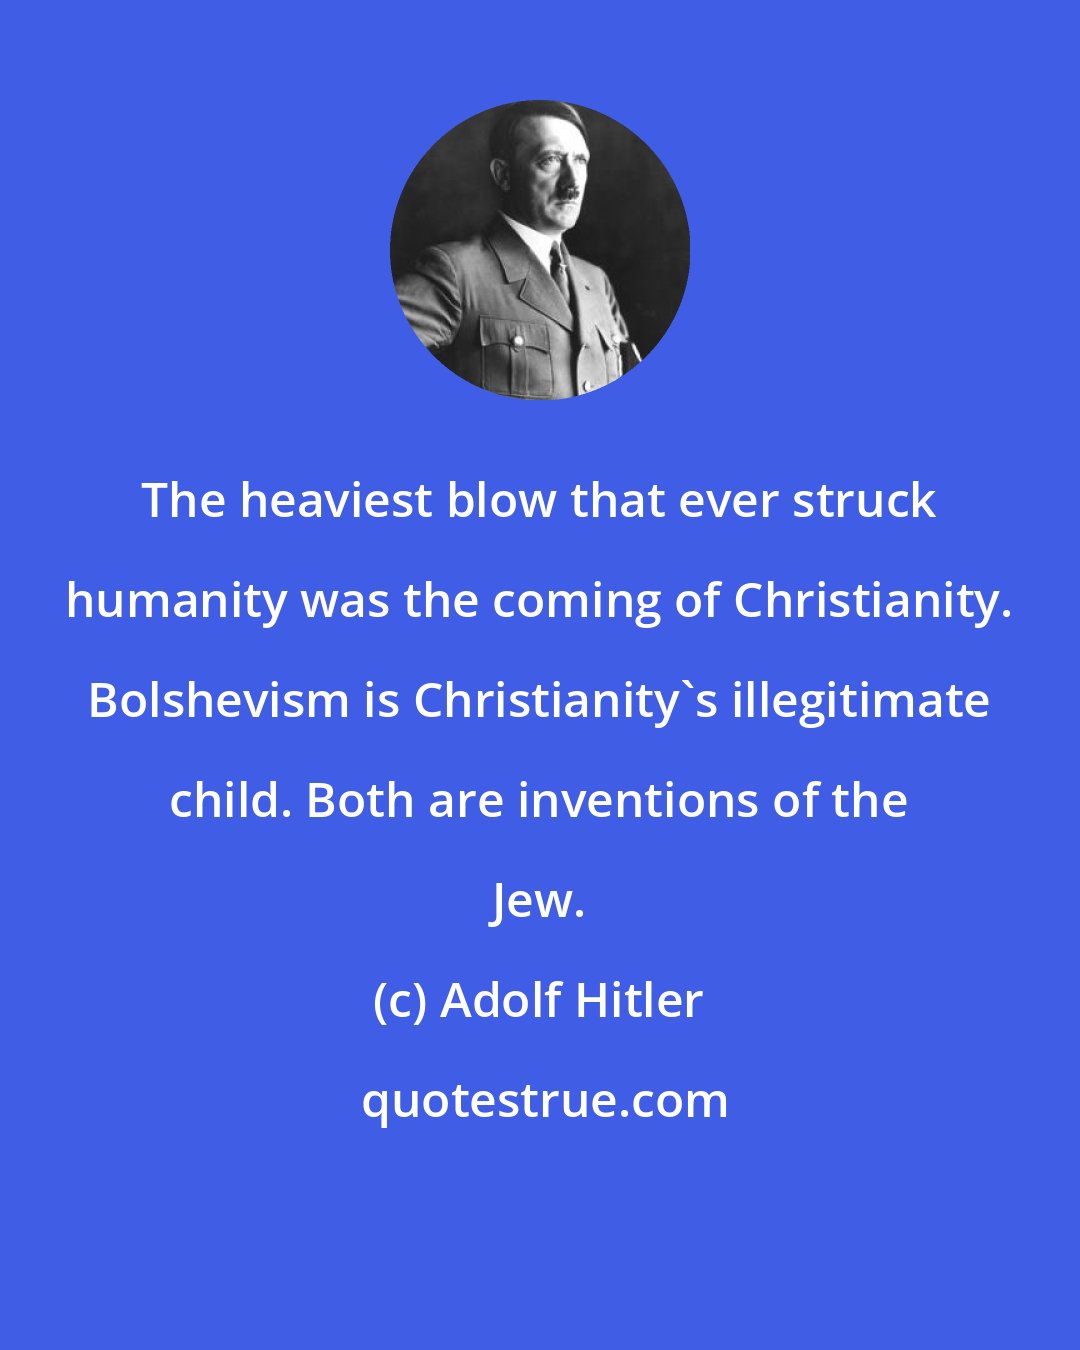 Adolf Hitler: The heaviest blow that ever struck humanity was the coming of Christianity. Bolshevism is Christianity's illegitimate child. Both are inventions of the Jew.